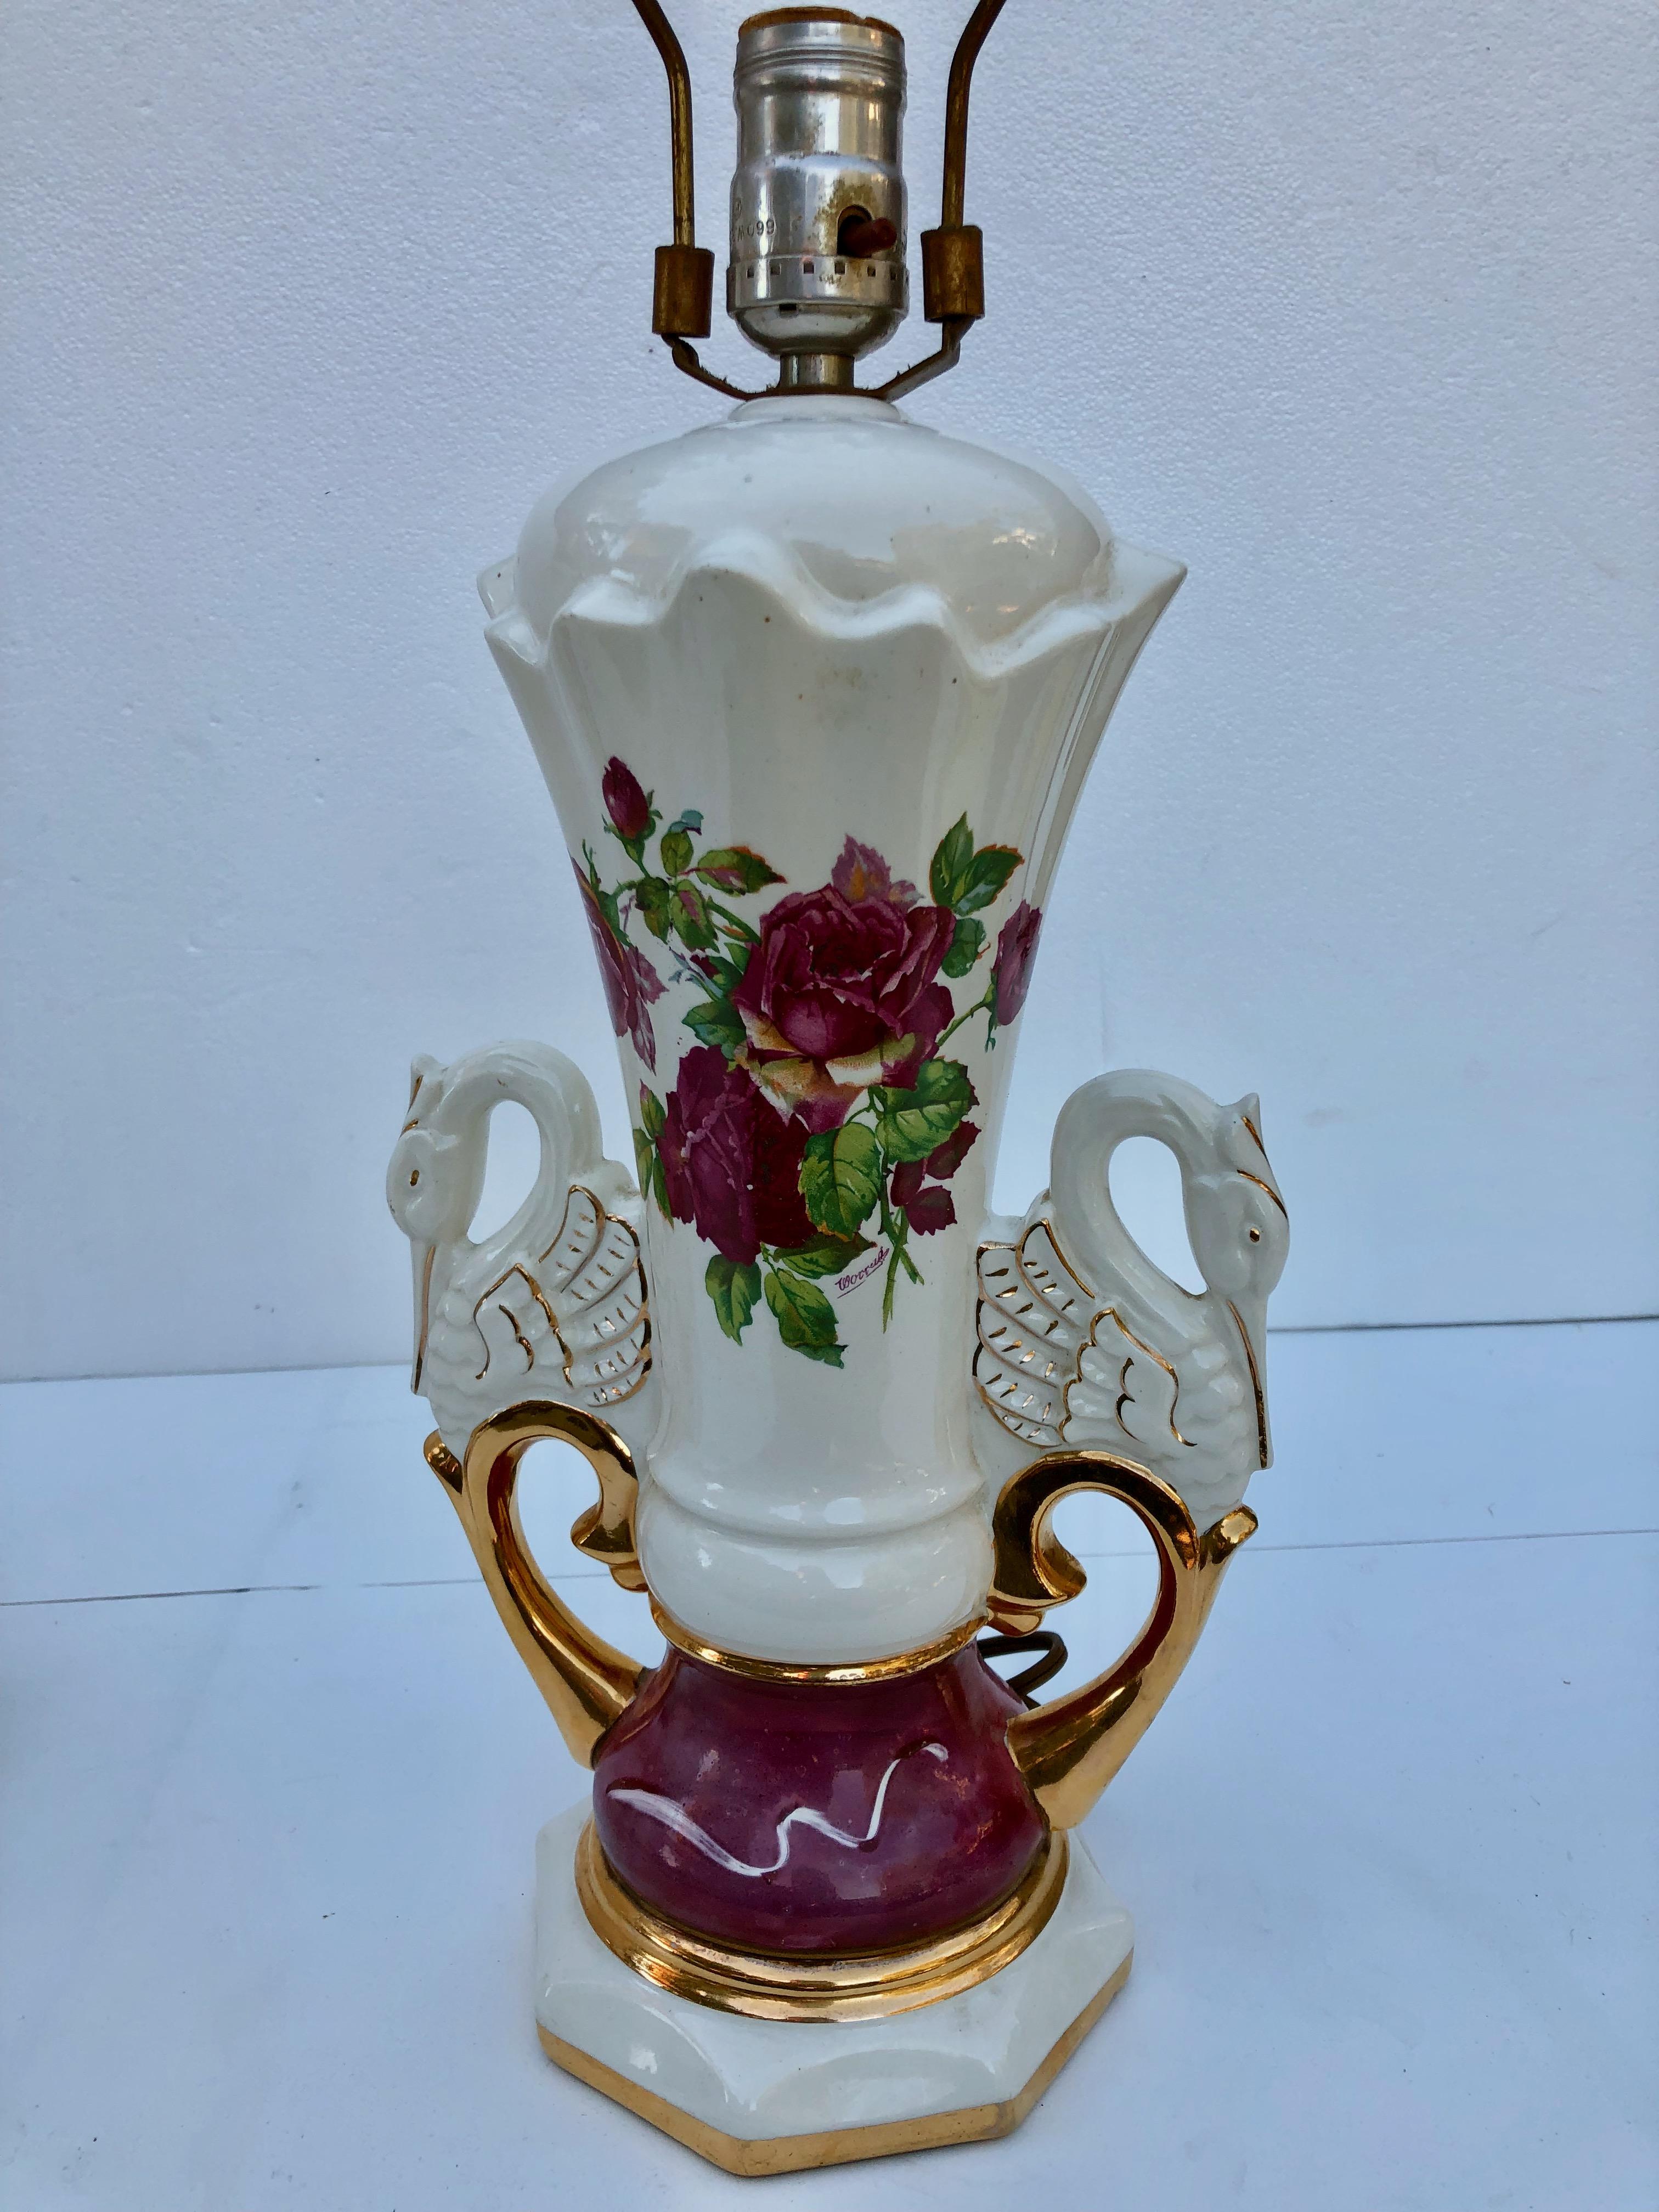 3 Jenny Worall Hand Painted Ceramic Table Lamps, 2 Are a Matched Set, Rose Motif In Good Condition For Sale In Petaluma, CA